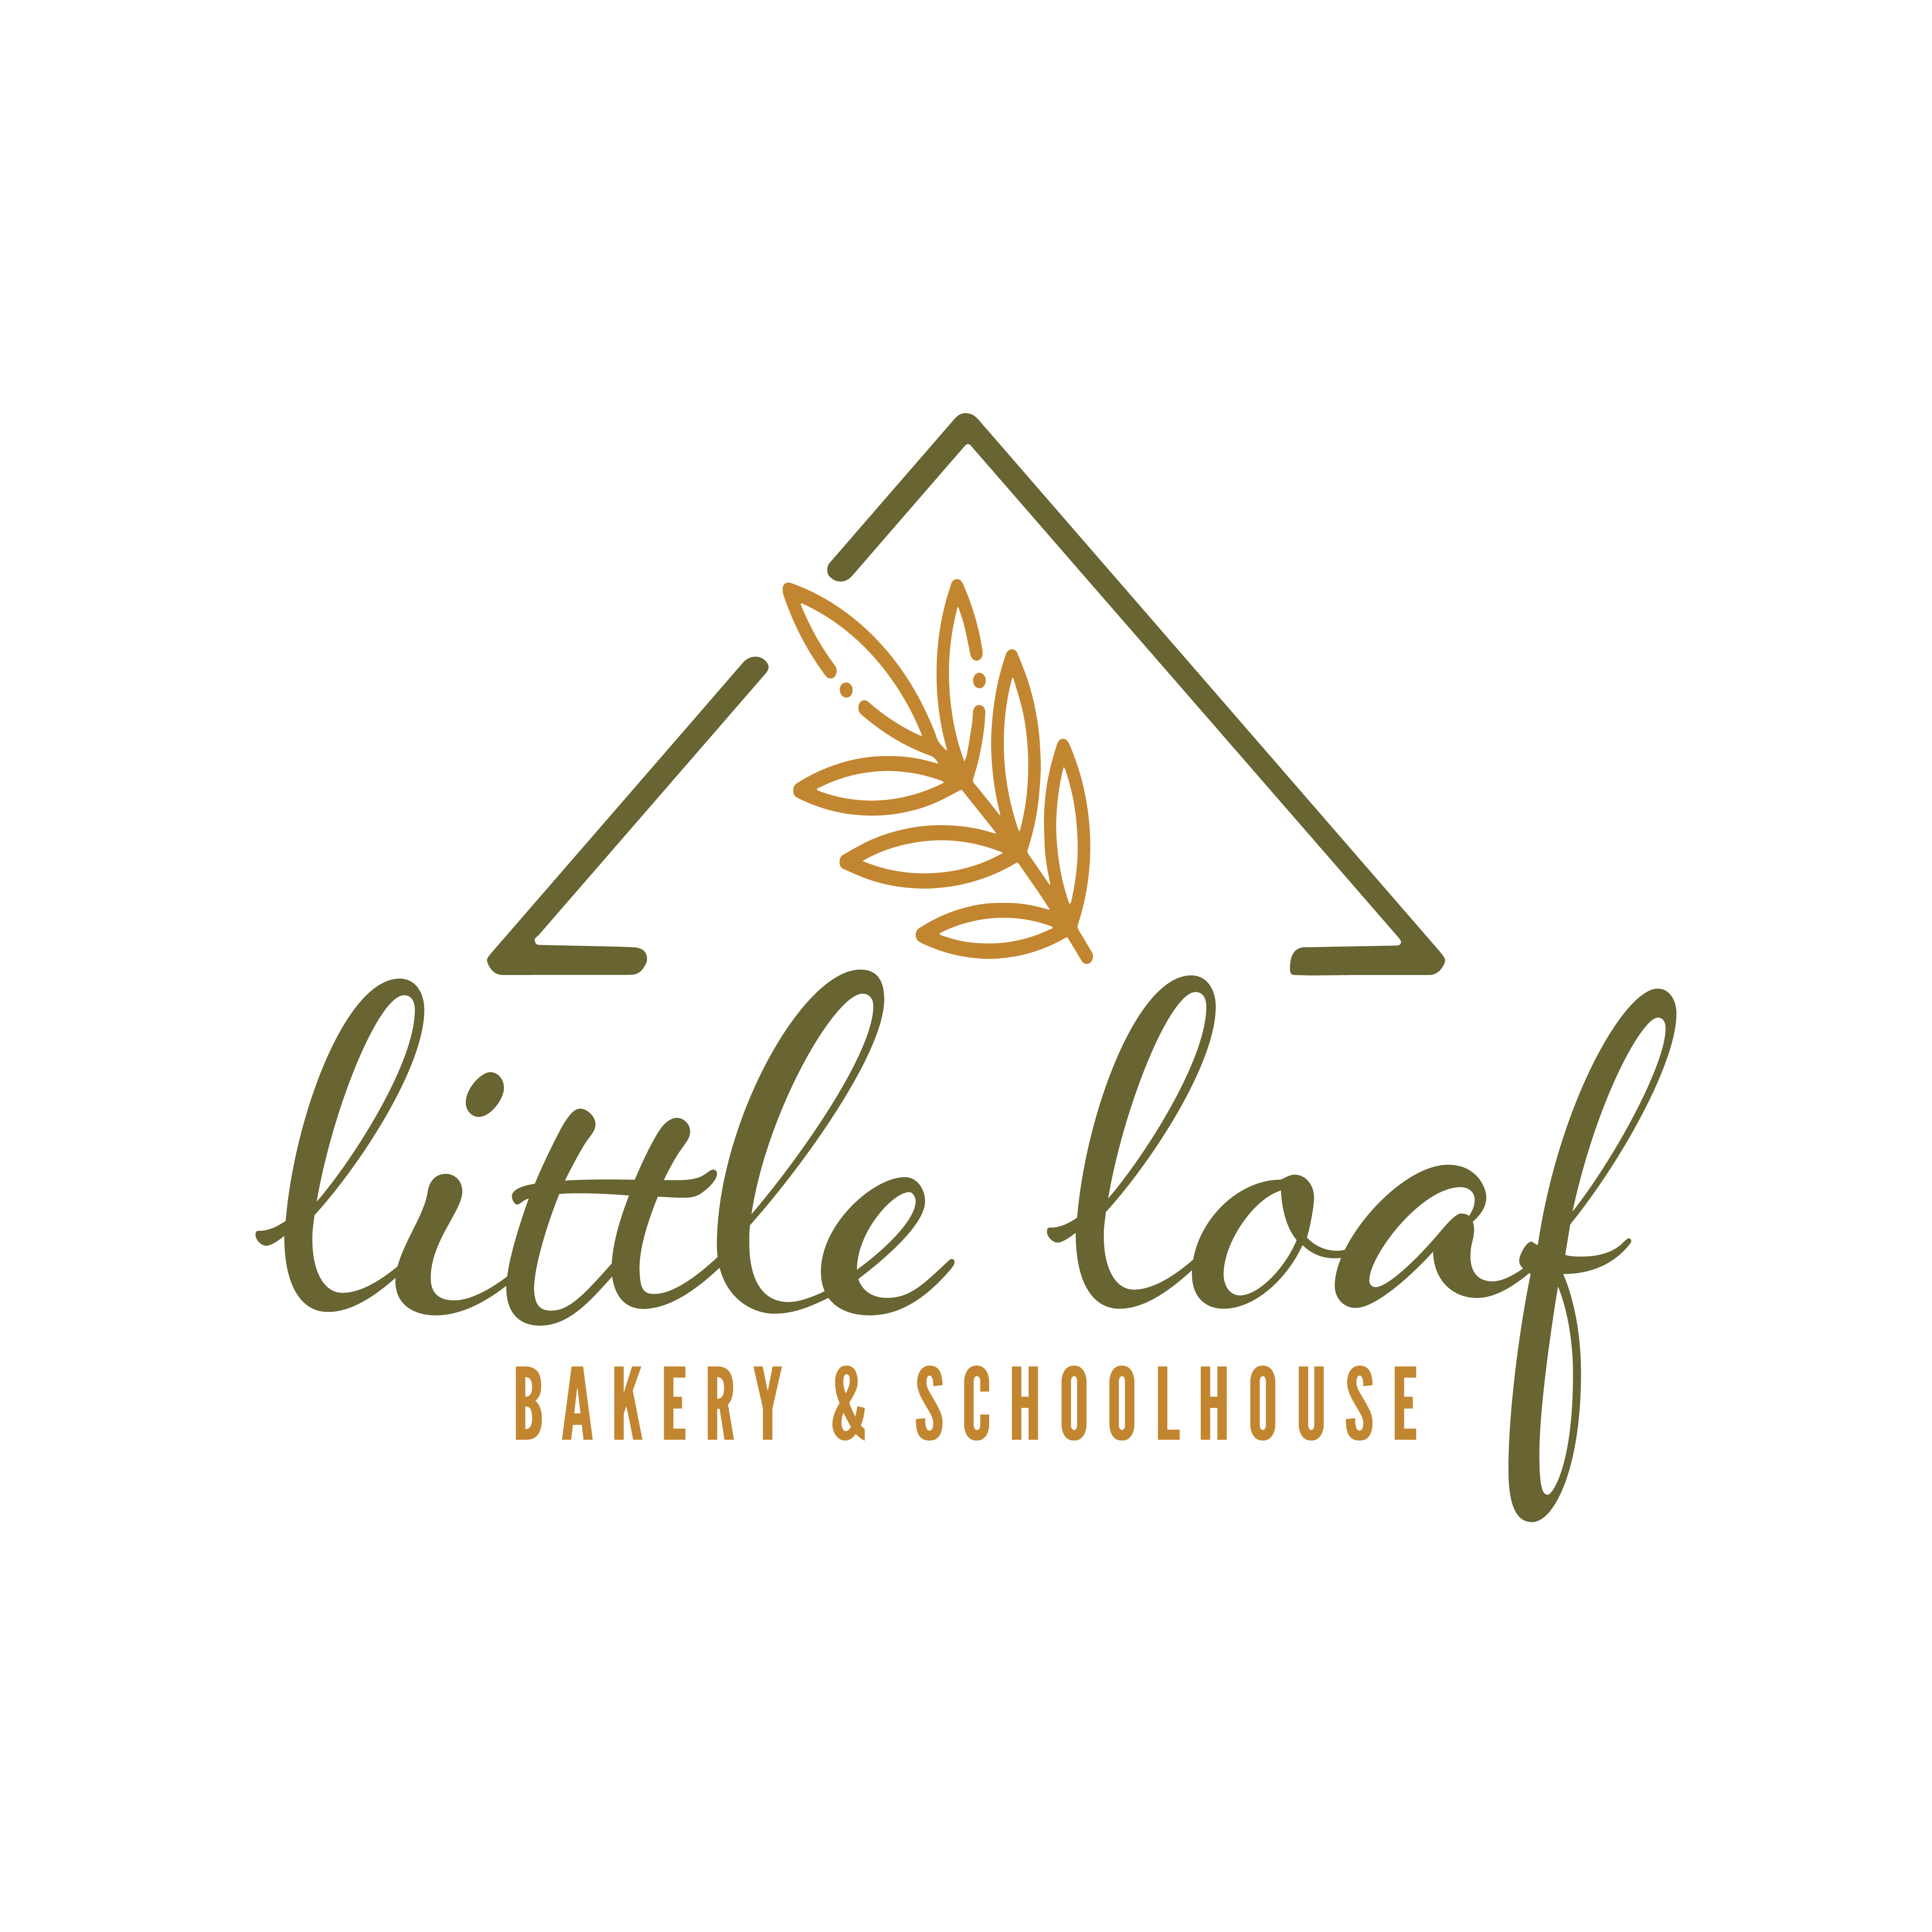 Little Loaf Bakery and Schoolhouse